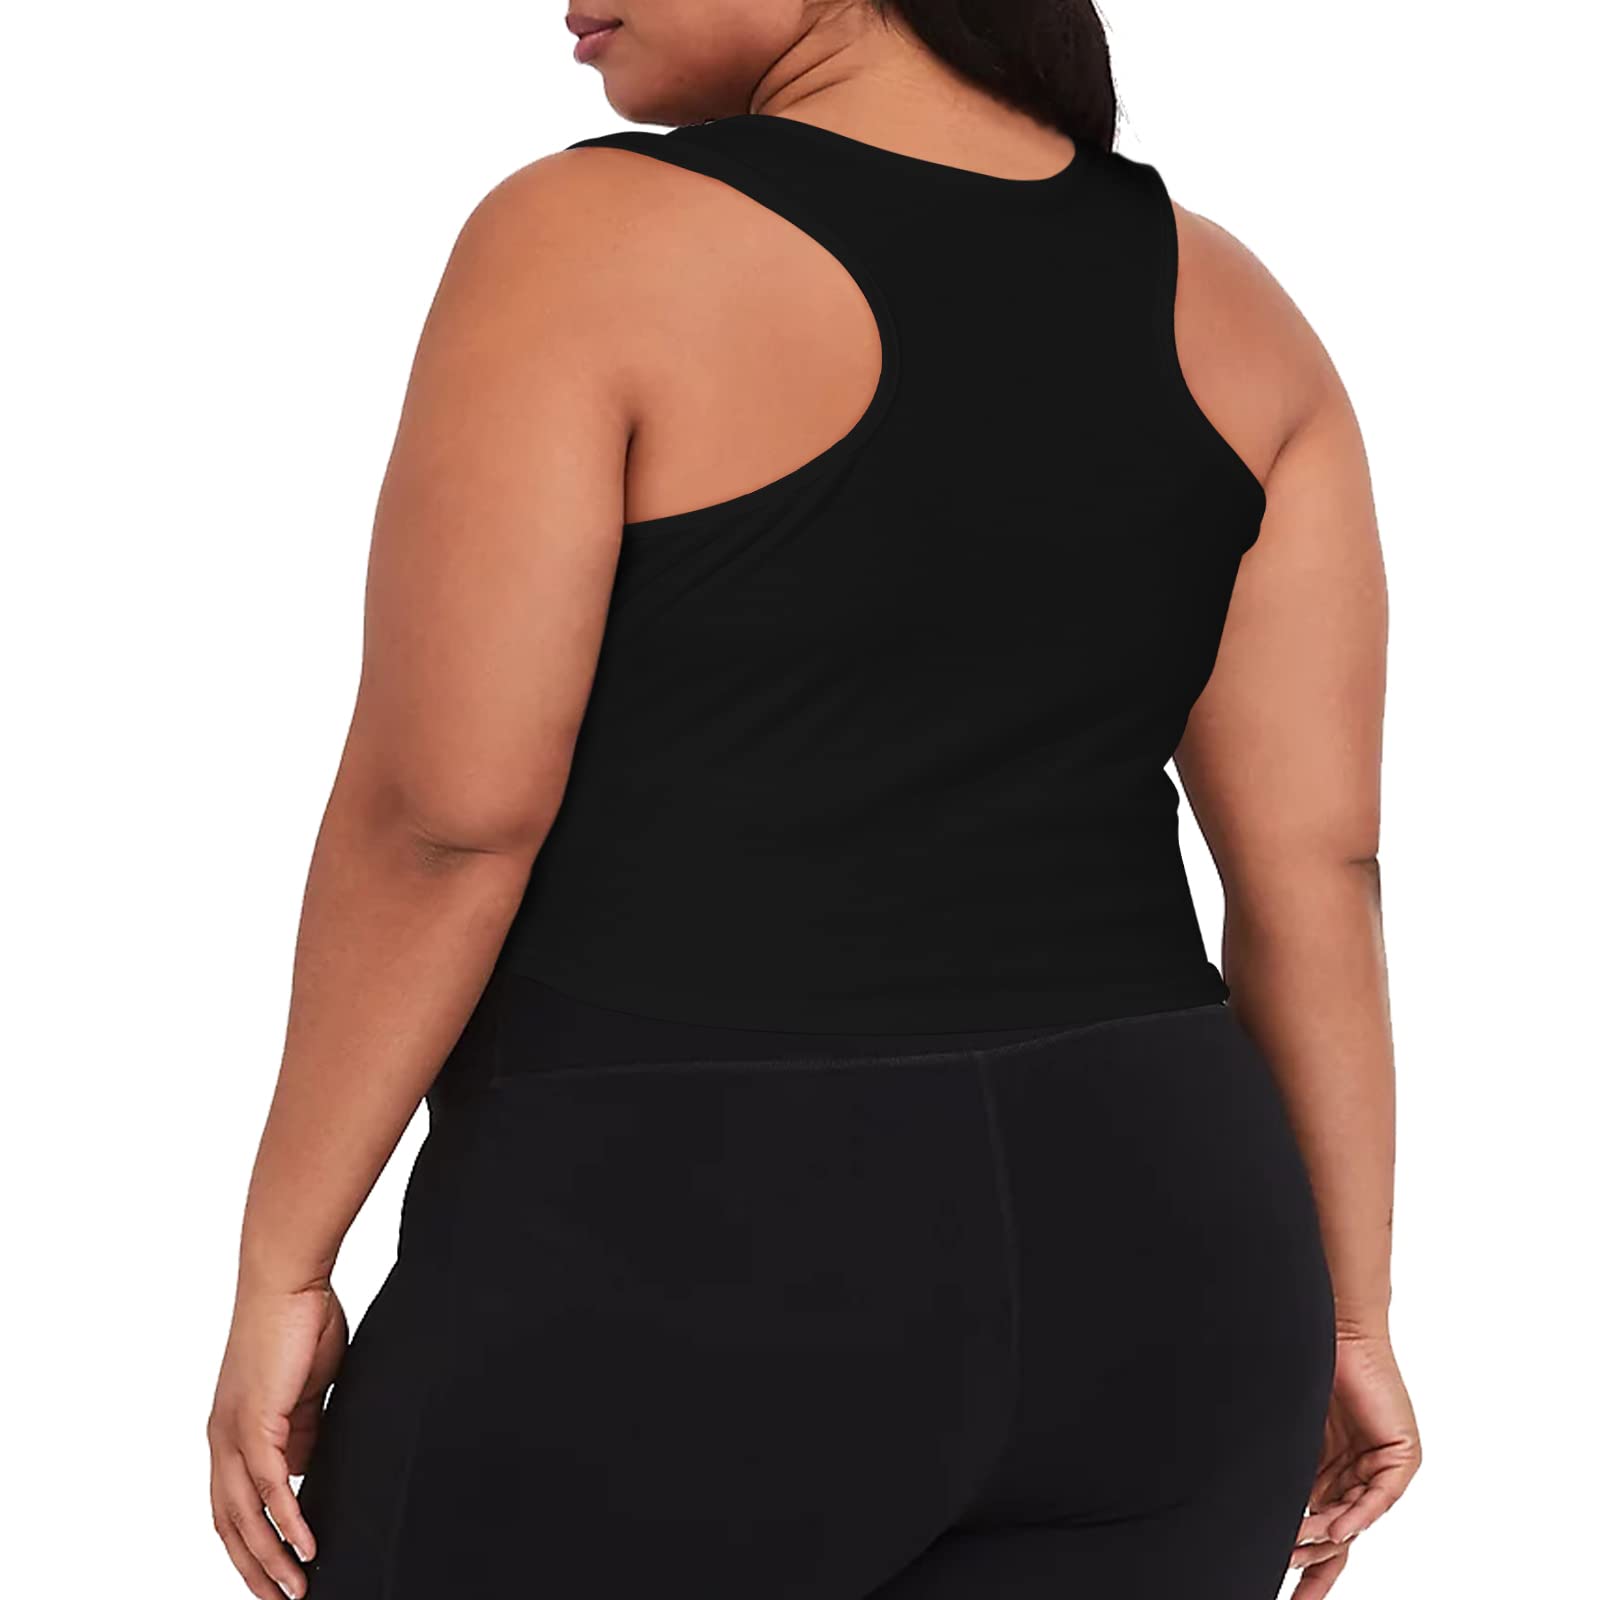 3 Pieces Basic Plus Size Tank Tops for Women-Black,Grey,Navy Blue - Moon Wood